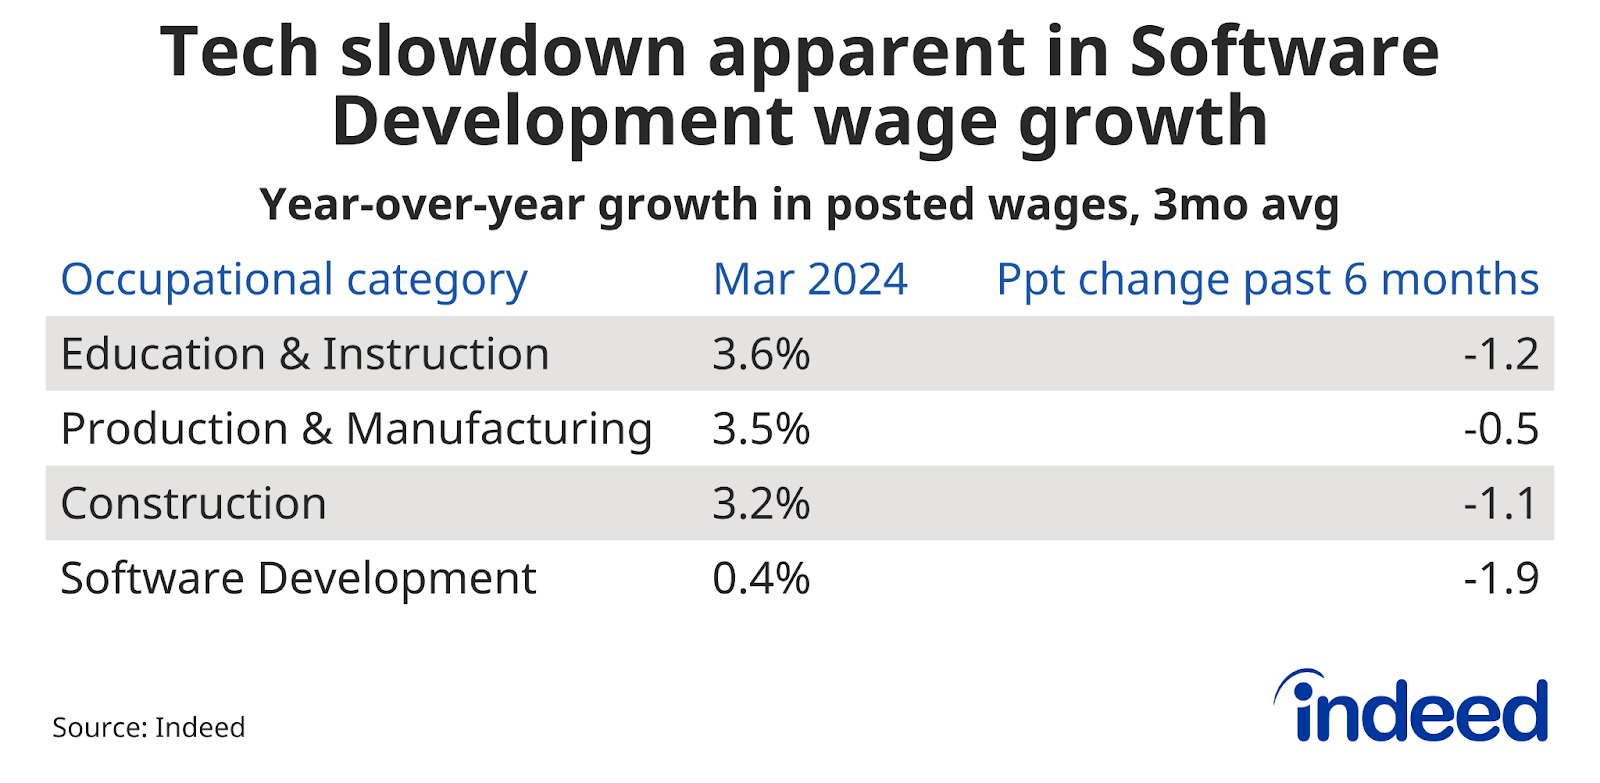 Table showing the year-over-year percent change in posted wages as of March 2024 and the percentage point change in the past six months, by job category. Production & Manufacturing and Software Development wages grew at 3.5% and 0.4%, respectively, year-over-year. 